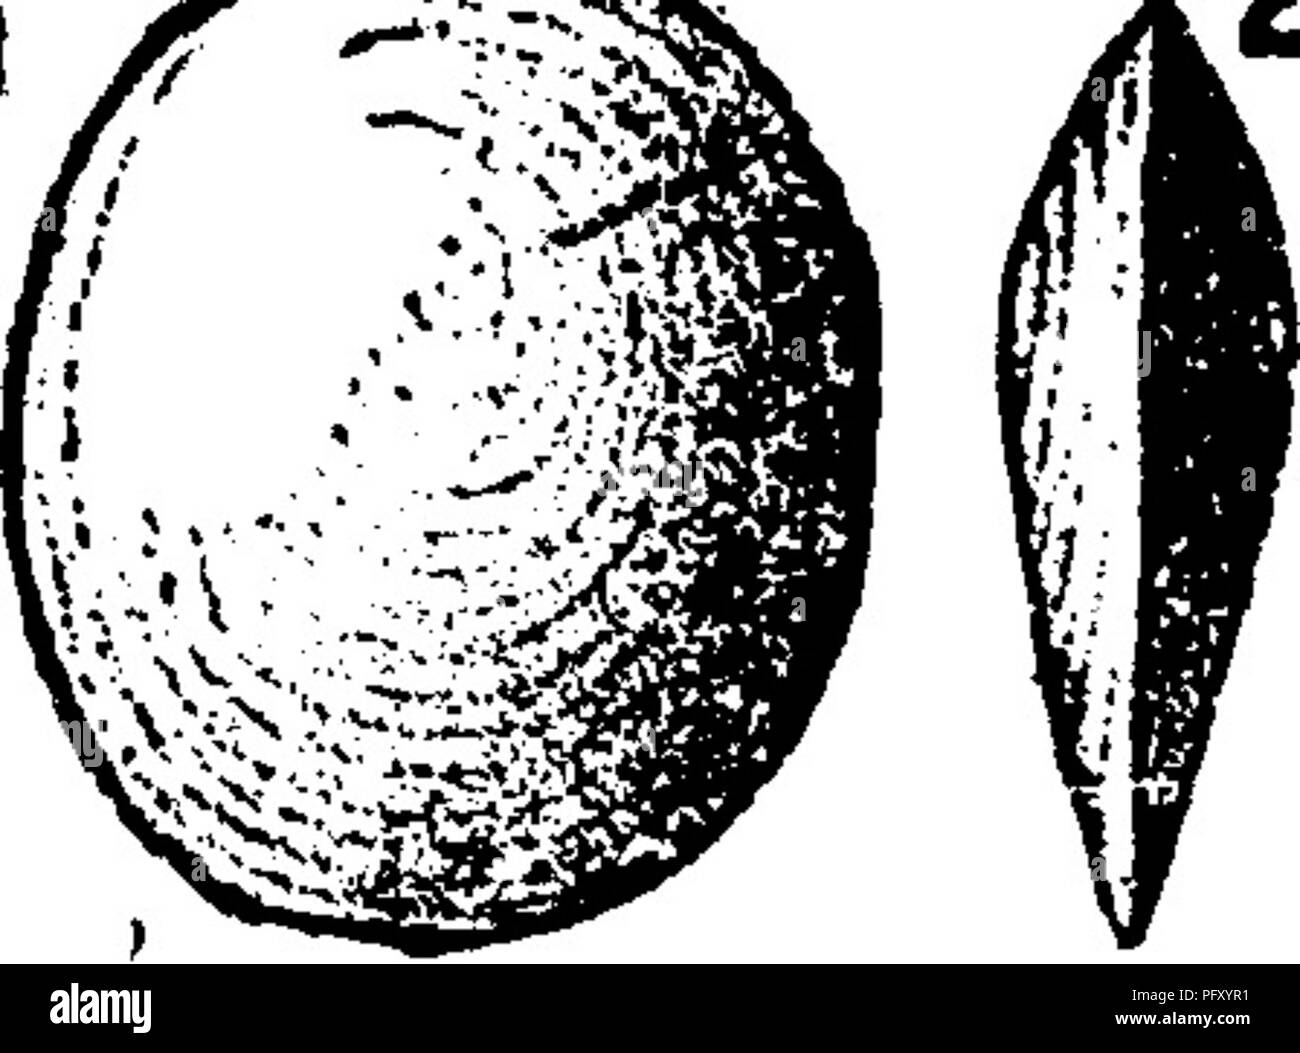 . A dictionary of the fossils of Pennsylvania and neighboring states named in the reports and catalogues of the survey ... Paleontology. 637 Pholid. this is always arguing in a circle. J. P. L.]—Hudson river shale at Cincinnati, O.—III}), Pholidops hamiltonensis, (Hamiltonice, Hall, 1860, leSth 6 , An. Kt. Pal. N. Y. IV. p. 32, pi. 3, fig. 6. Hamil- ton.) Olaypole's specimen 11,705 (5-66) from Barnett's Mill, Perry Co., Pa. Hamilton upper shales. VIII c. Pholidops oblata, Hall. Pal. N. Y. Vol. 4. p. 414, pi. 3, fig. 10 (given with the figure of P. arenaria above). Hamil- ton shales^ OnondL2ig2 Stock Photo